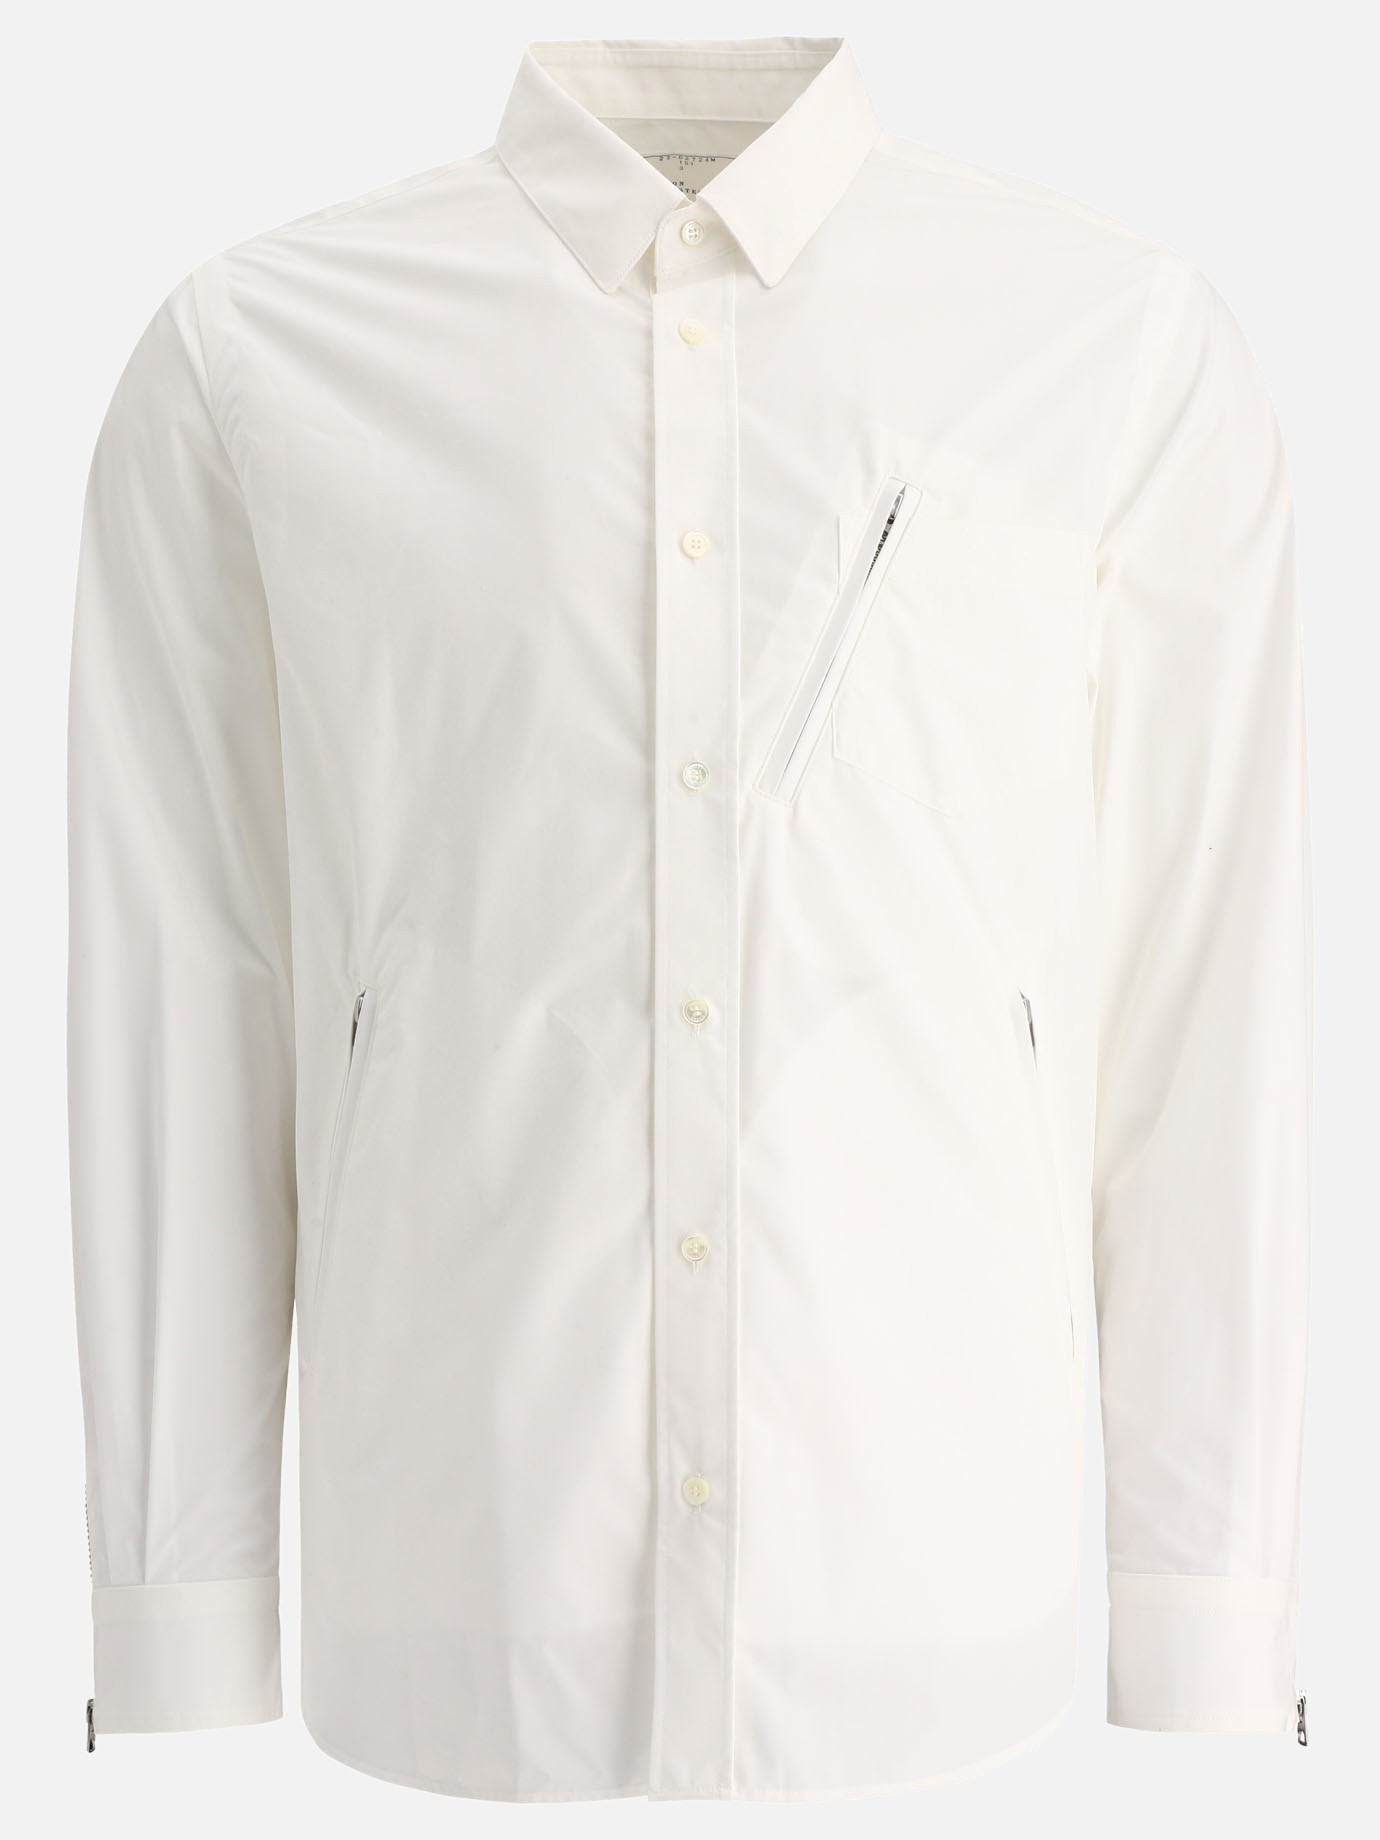 Shirt with zip details